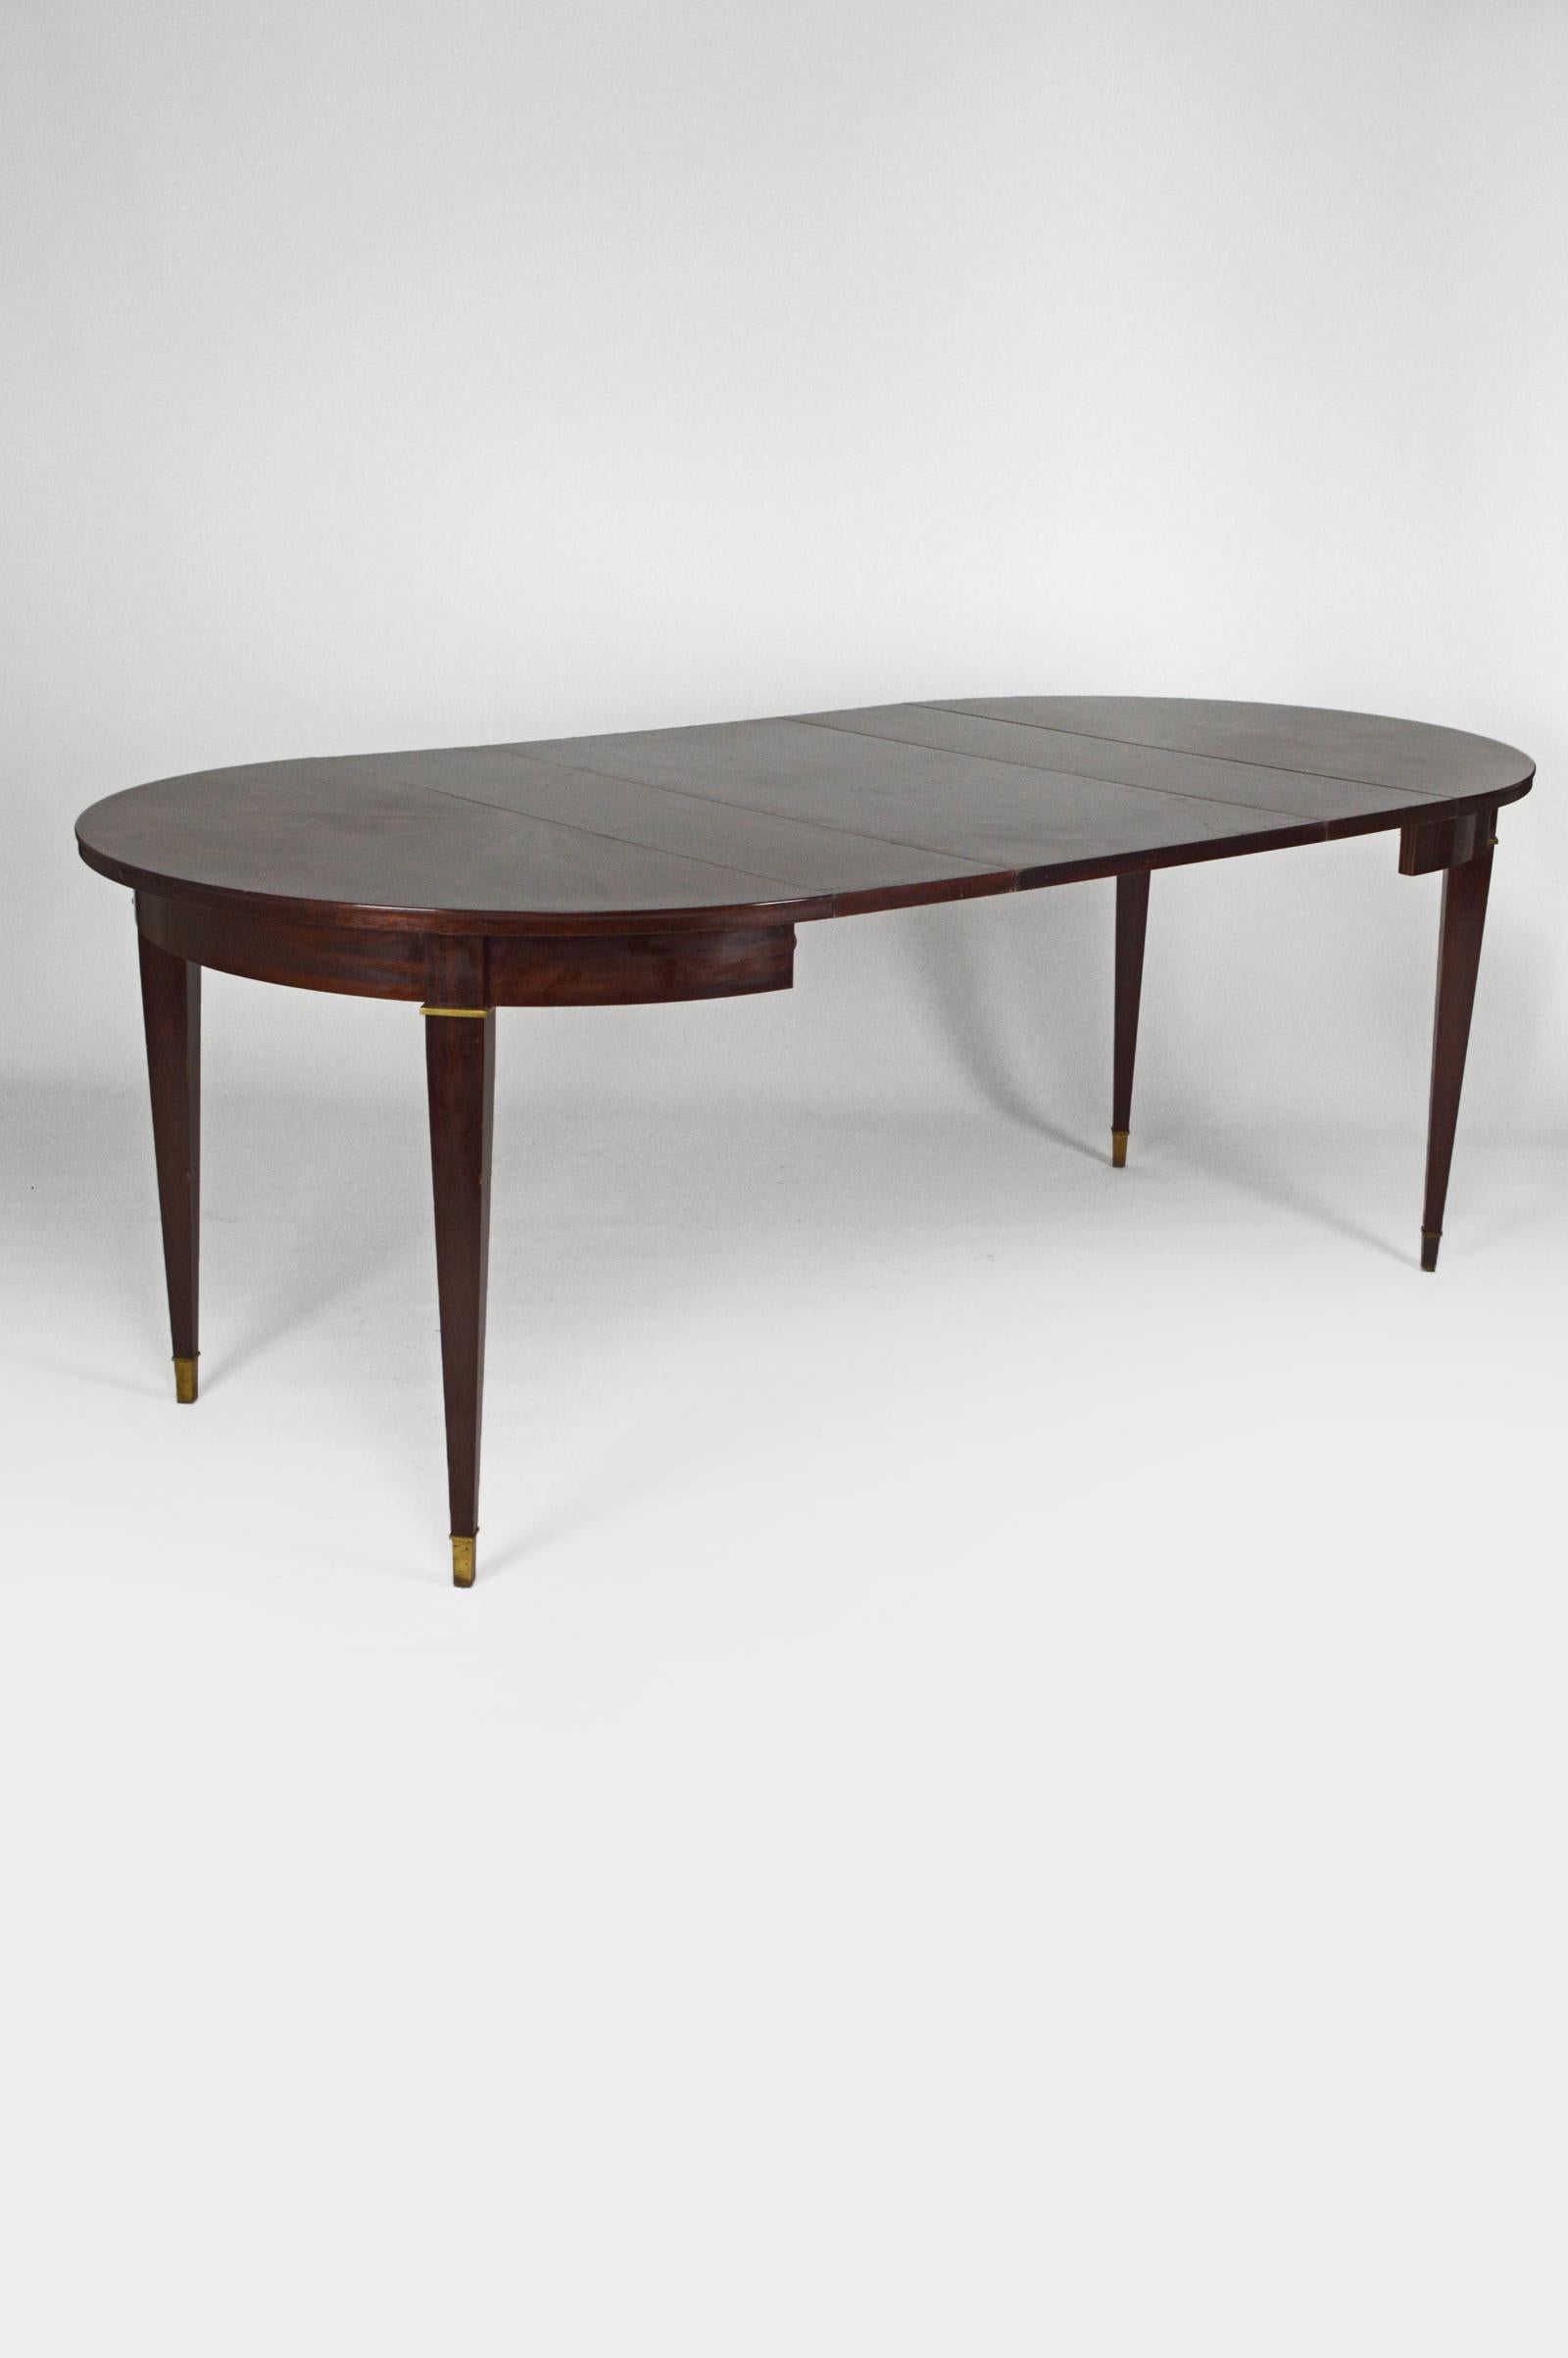 Art Deco Mahogany Round Table with Extensions, by Jacques Adnet, circa 1940 For Sale 3